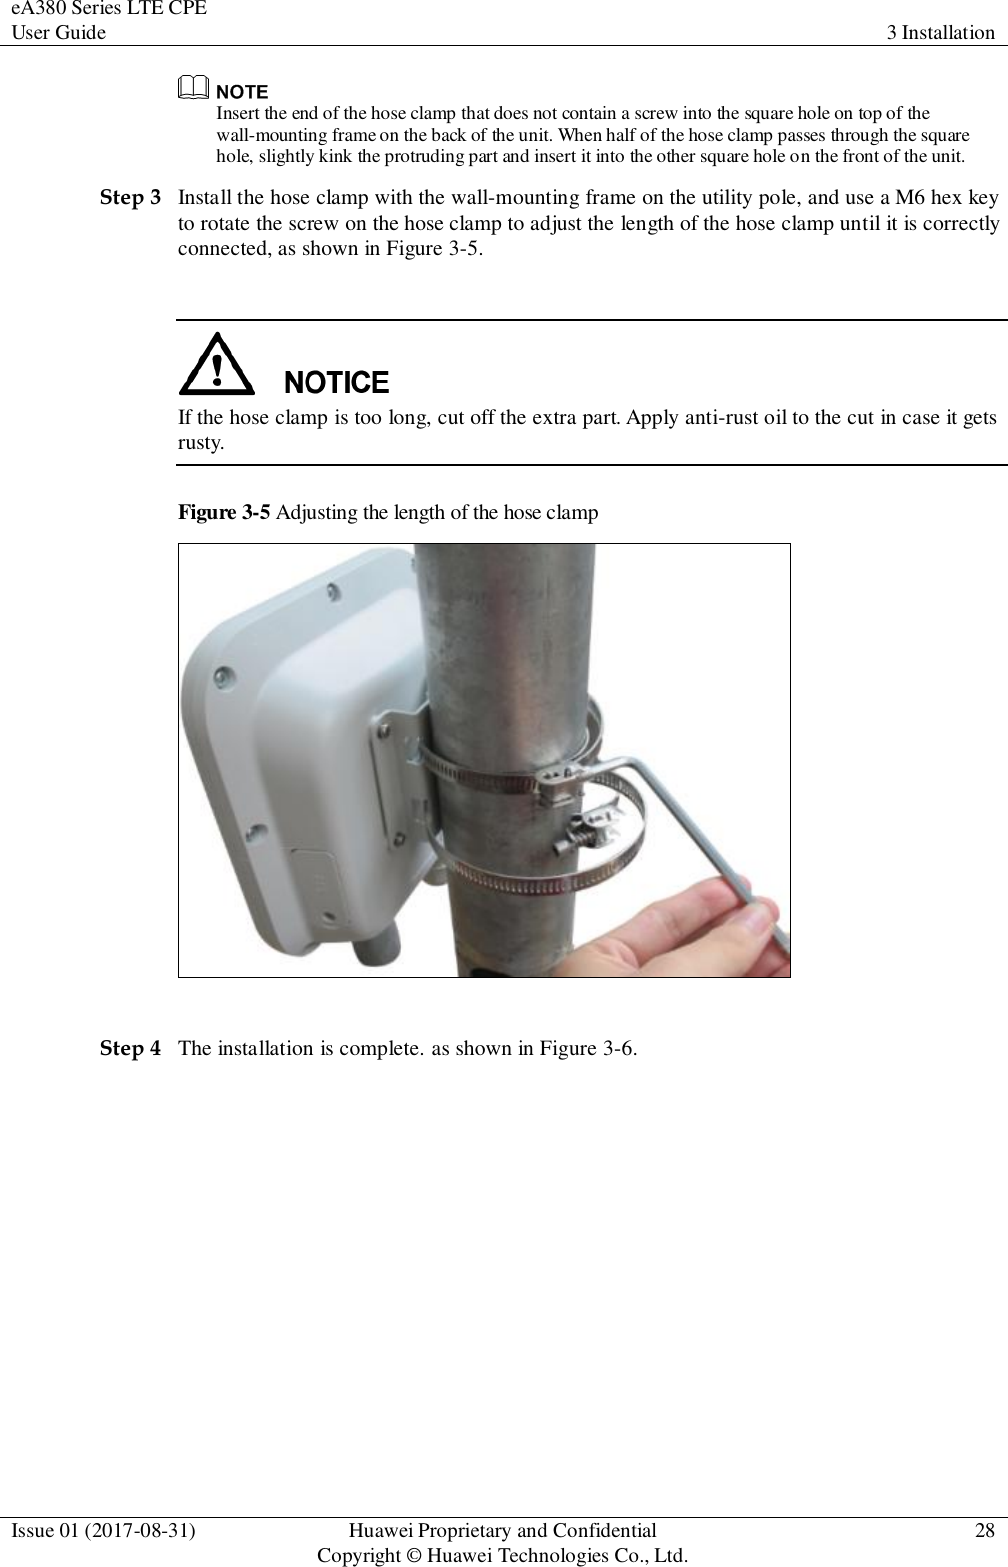 eA380 Series LTE CPE User Guide 3 Installation  Issue 01 (2017-08-31) Huawei Proprietary and Confidential                                     Copyright © Huawei Technologies Co., Ltd. 28   Insert the end of the hose clamp that does not contain a screw into the square hole on top of the wall-mounting frame on the back of the unit. When half of the hose clamp passes through the square hole, slightly kink the protruding part and insert it into the other square hole on the front of the unit. Step 3 Install the hose clamp with the wall-mounting frame on the utility pole, and use a M6 hex key to rotate the screw on the hose clamp to adjust the length of the hose clamp until it is correctly connected, as shown in Figure 3-5.   If the hose clamp is too long, cut off the extra part. Apply anti-rust oil to the cut in case it gets rusty.     Figure 3-5 Adjusting the length of the hose clamp   Step 4 The installation is complete. as shown in Figure 3-6. 